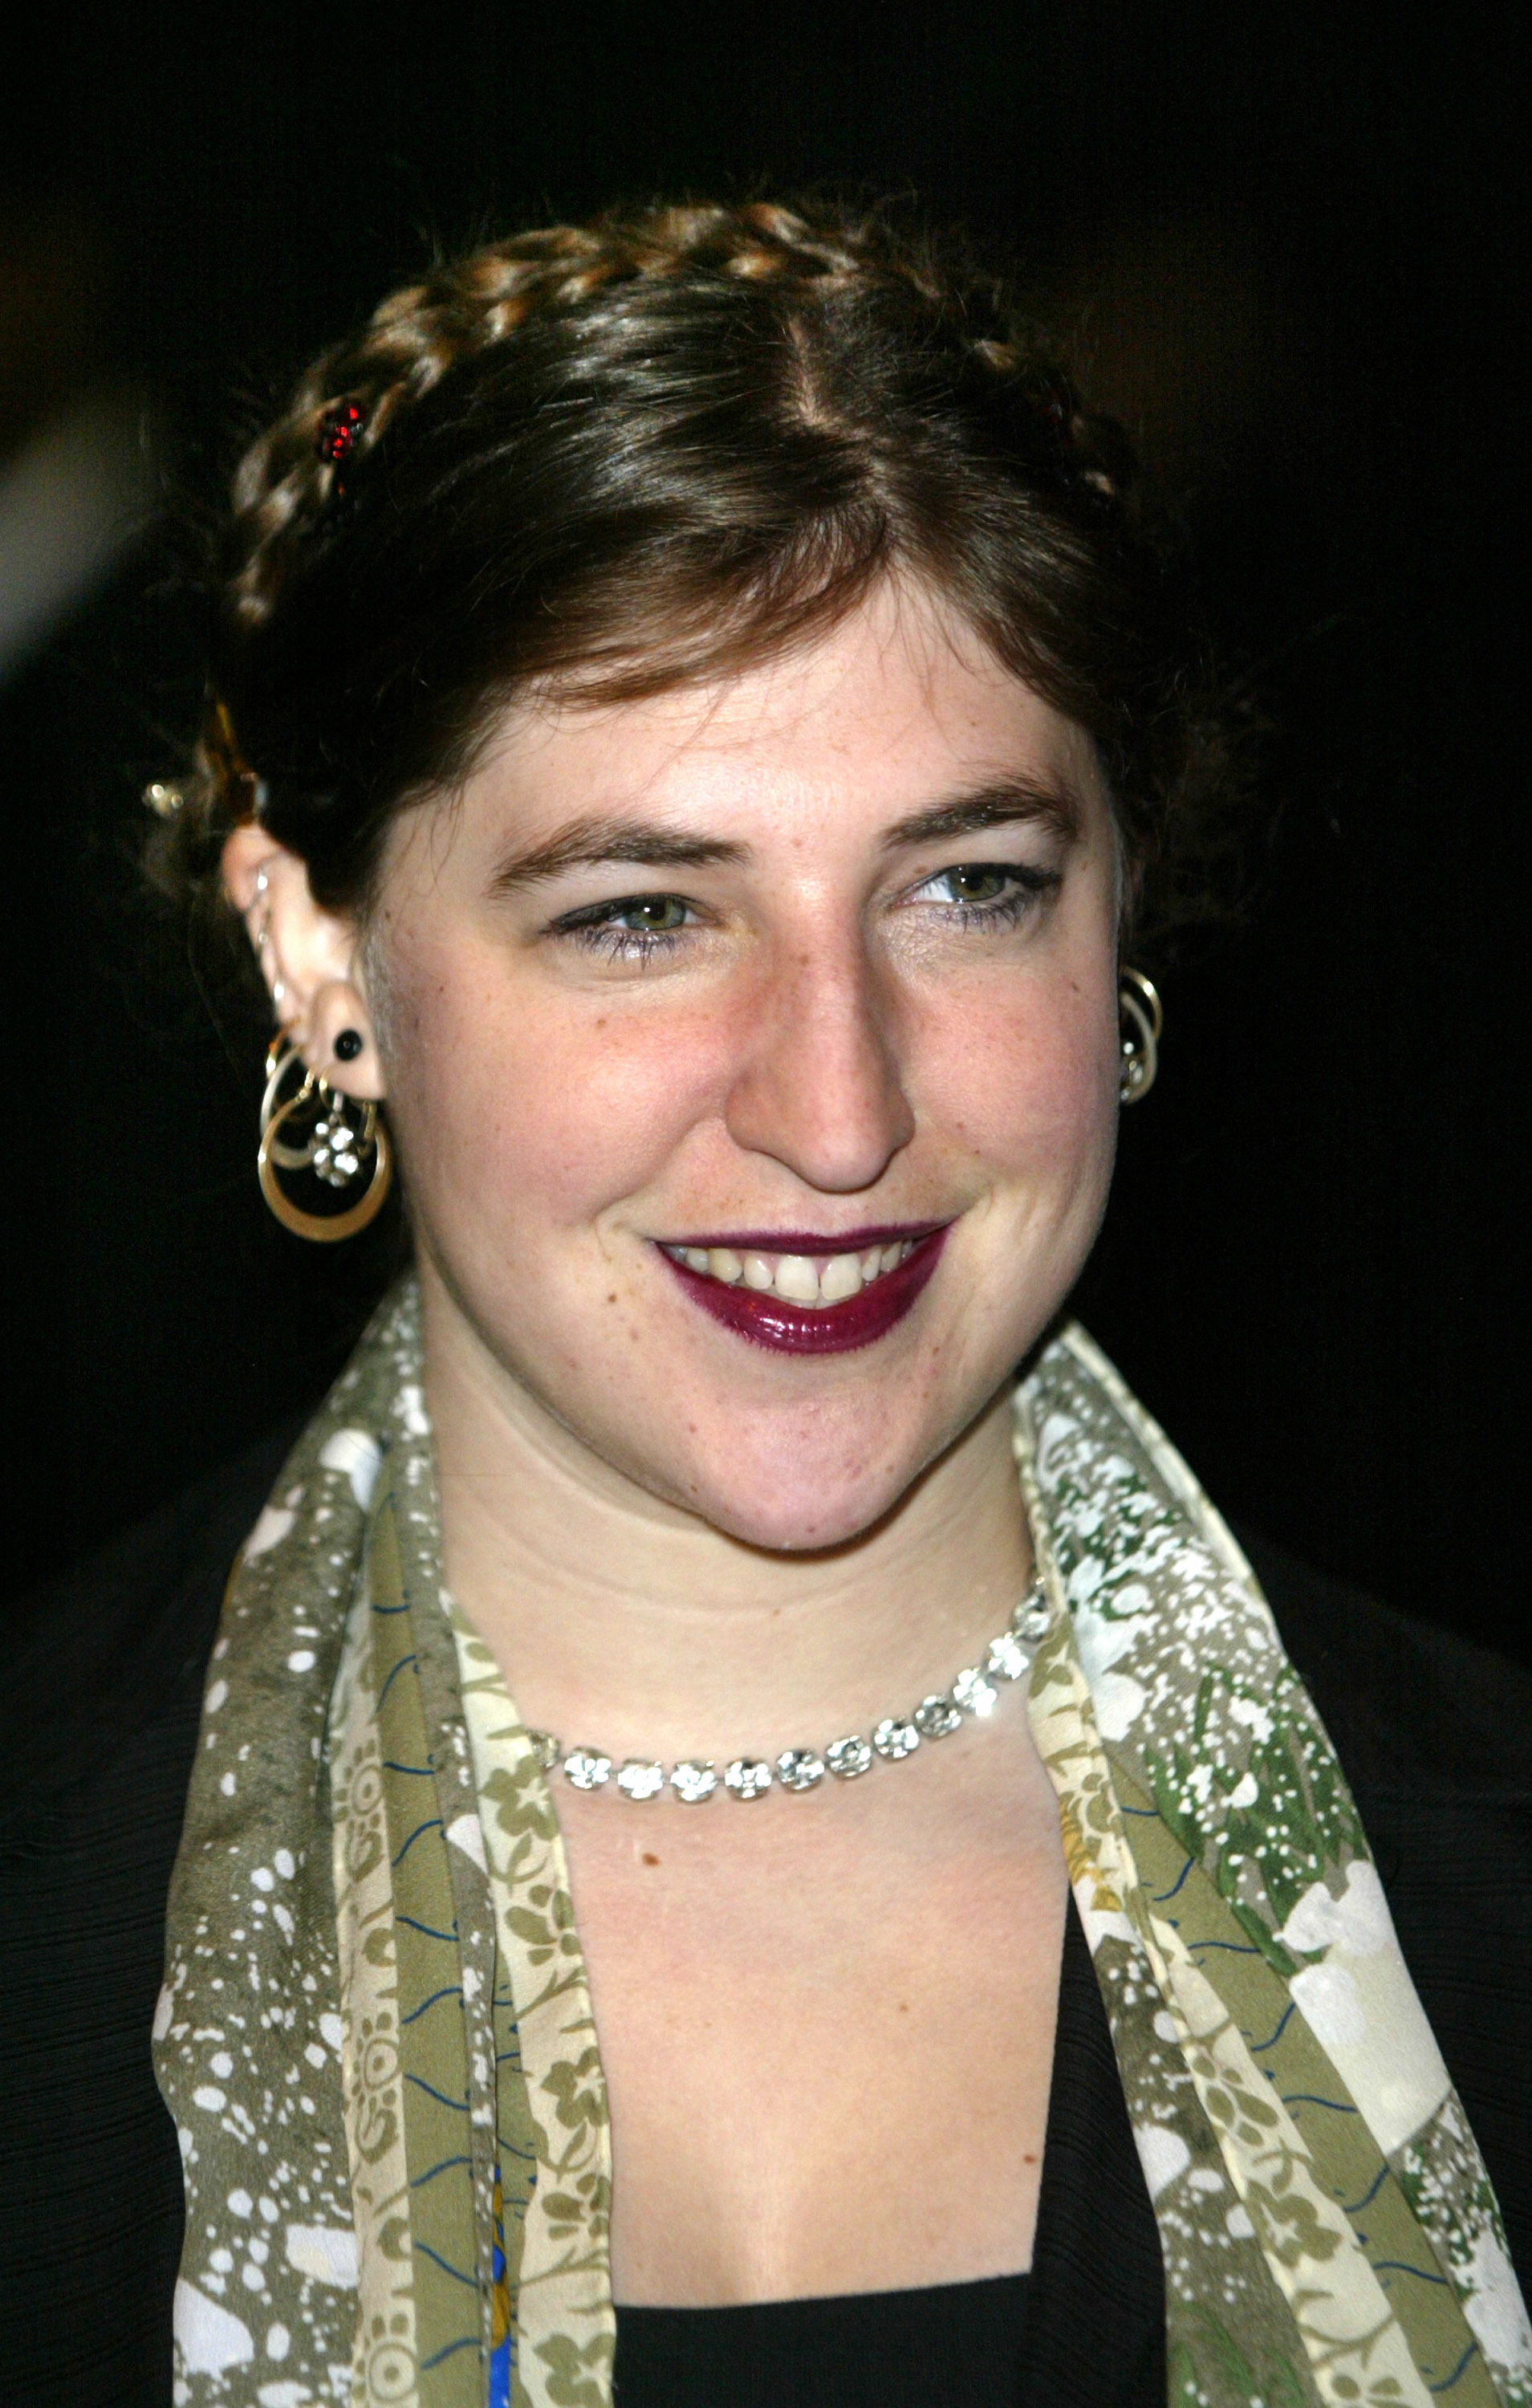 Mayim Bialik attends the premiere of Showtime's "Fat Actress," at Arclight Cinemas, on February 23, 2005. | Source: Getty Images